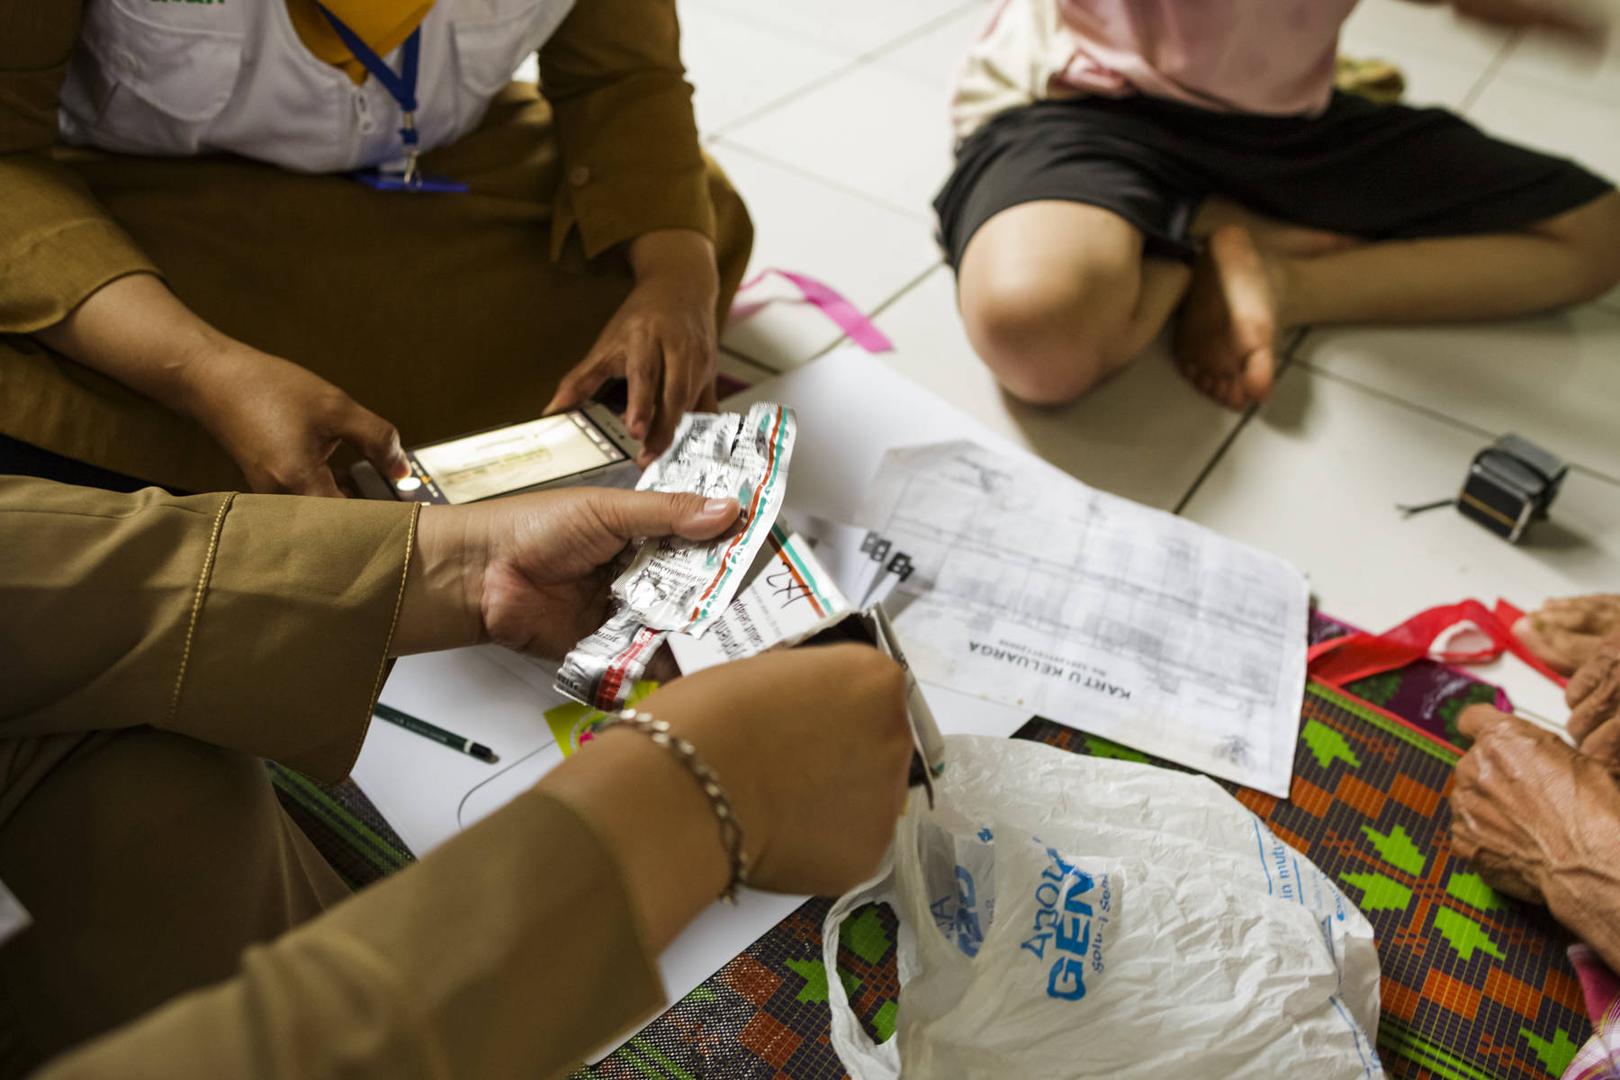 Community health workers give medication to local residents in their home in Indonesia